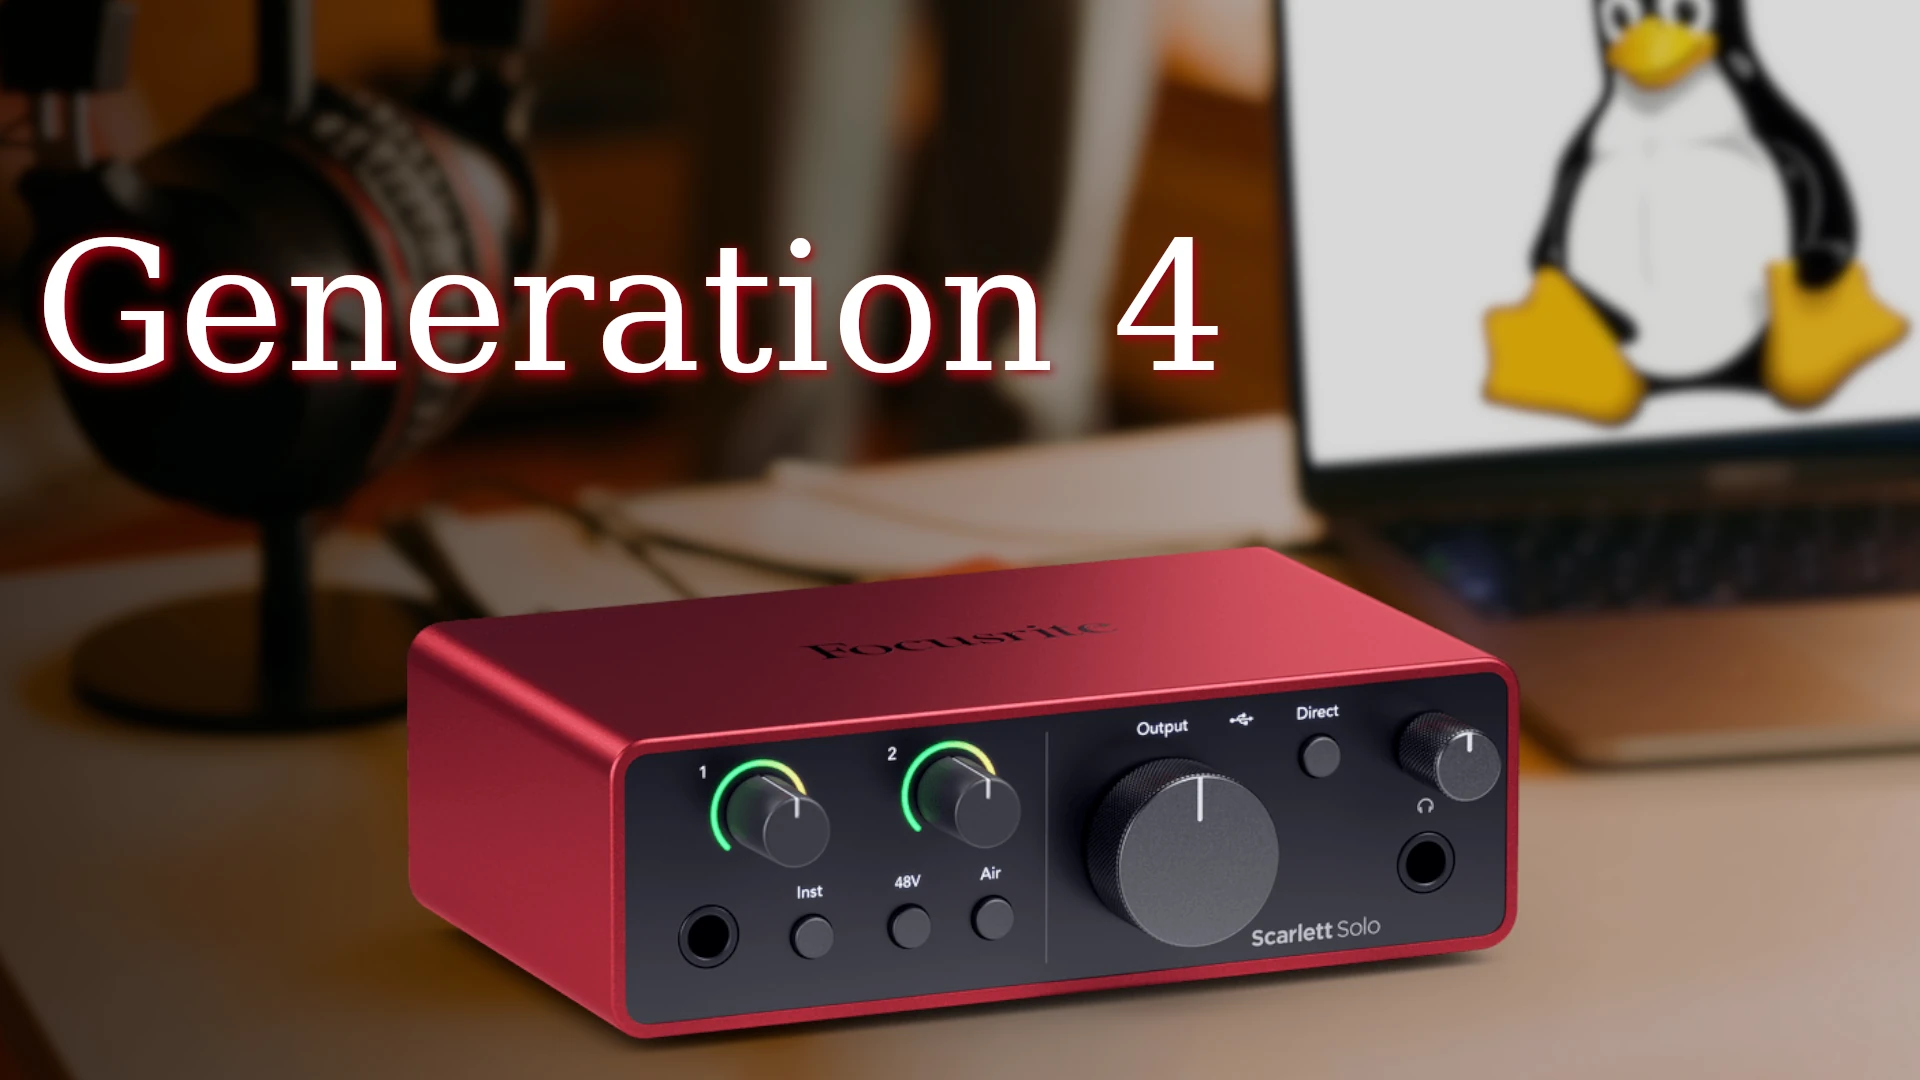 With the recent release of kernel 6.8 overflowing with Focusrite Gen 4 driver goodness, I figured it’s the perfect time to test the latest Gen 4